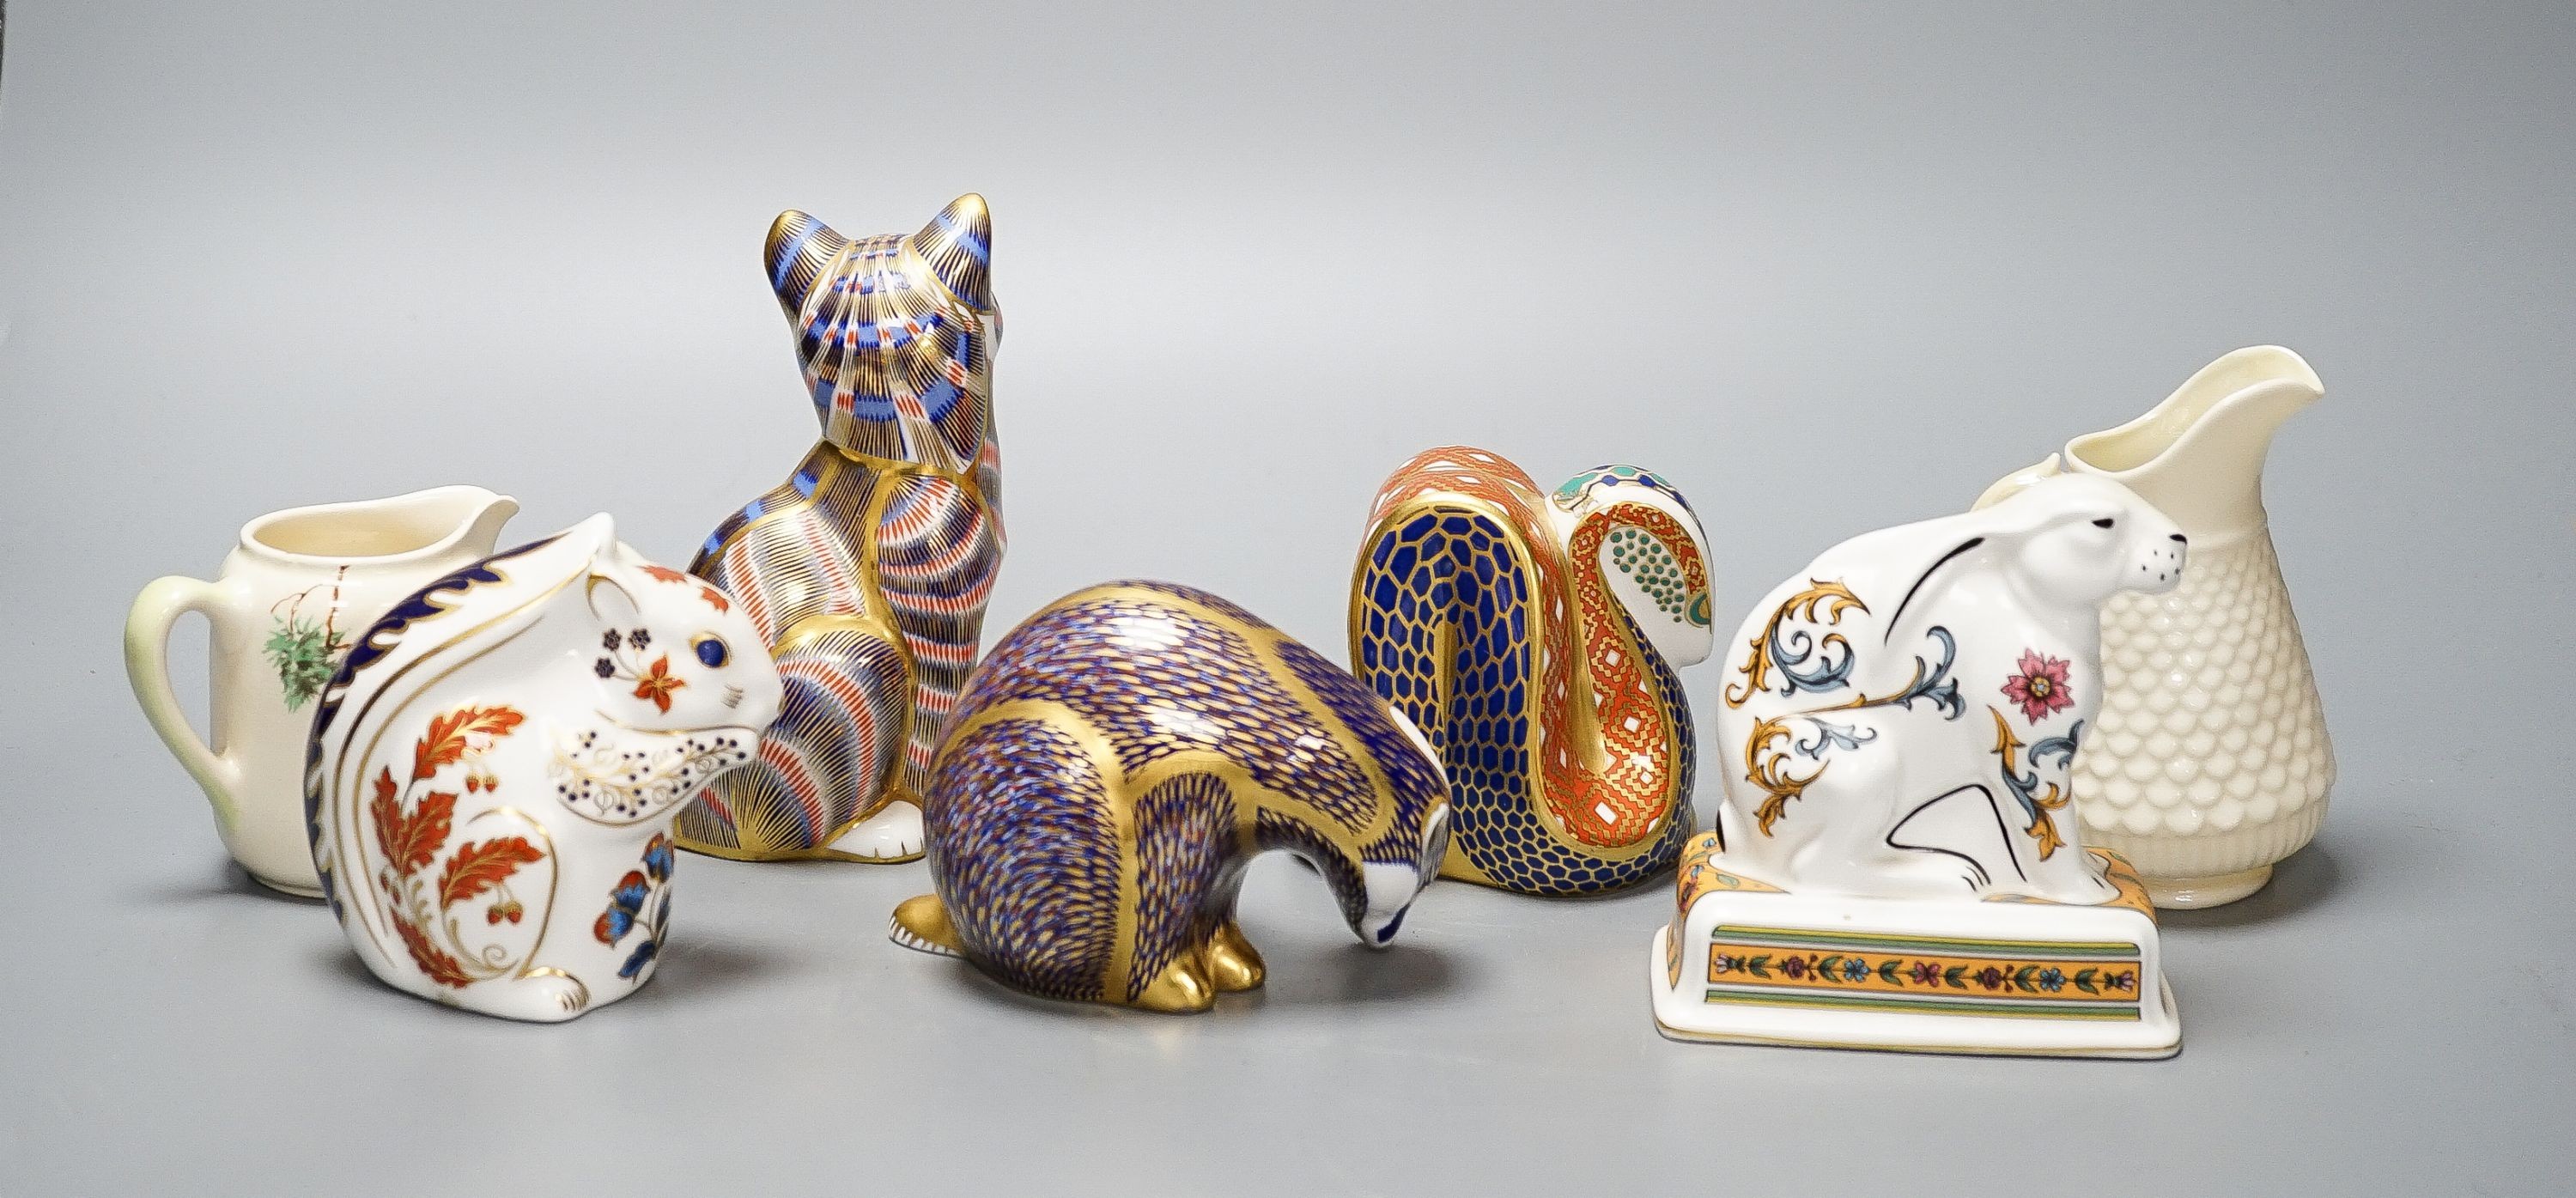 Four Royal Crown Derby paperweights, a Royal Doulton jug, a Belleek jug and a Wedgwood Noah’s ark collection hare